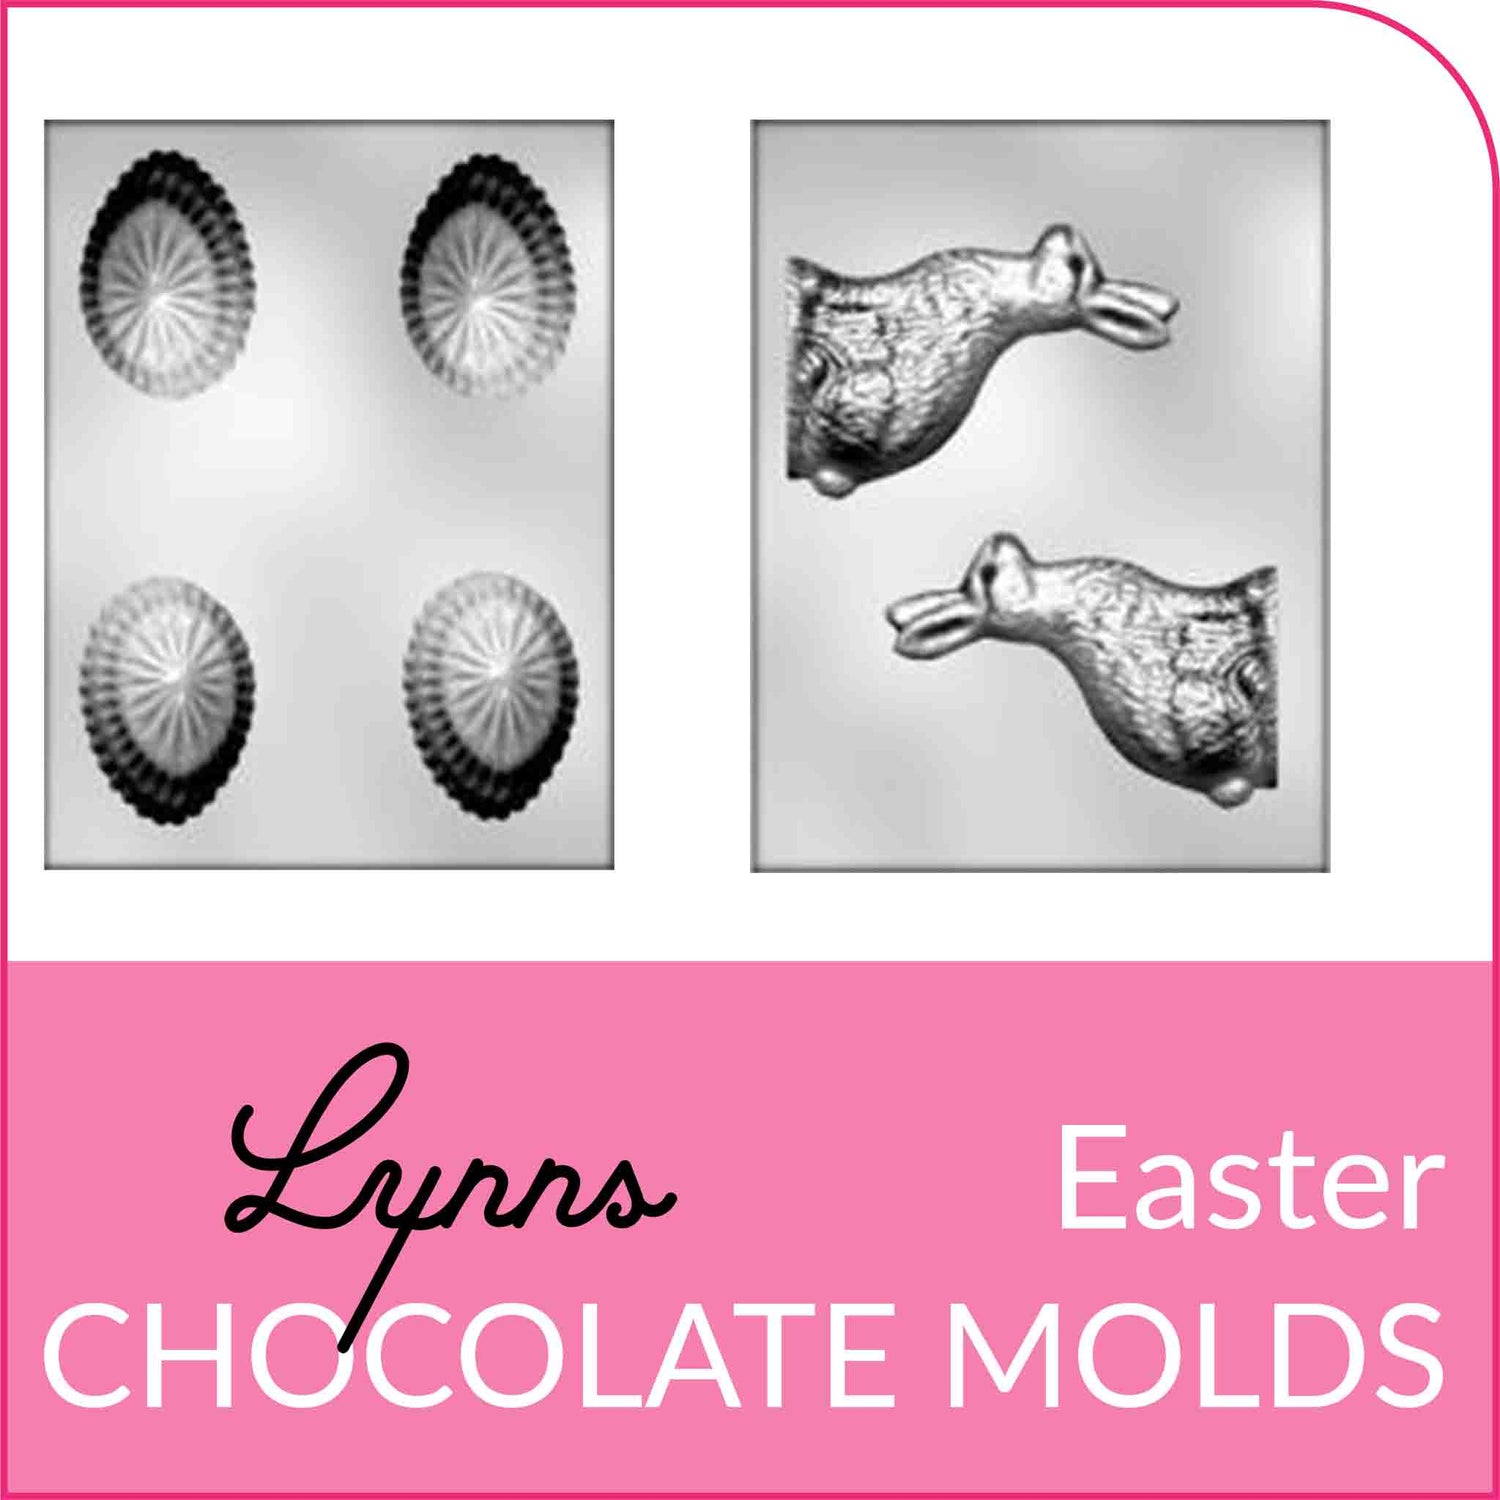 Shop Easter Themed Chocolates at Lynn's Cake, Candy, & Chocolate Supplies